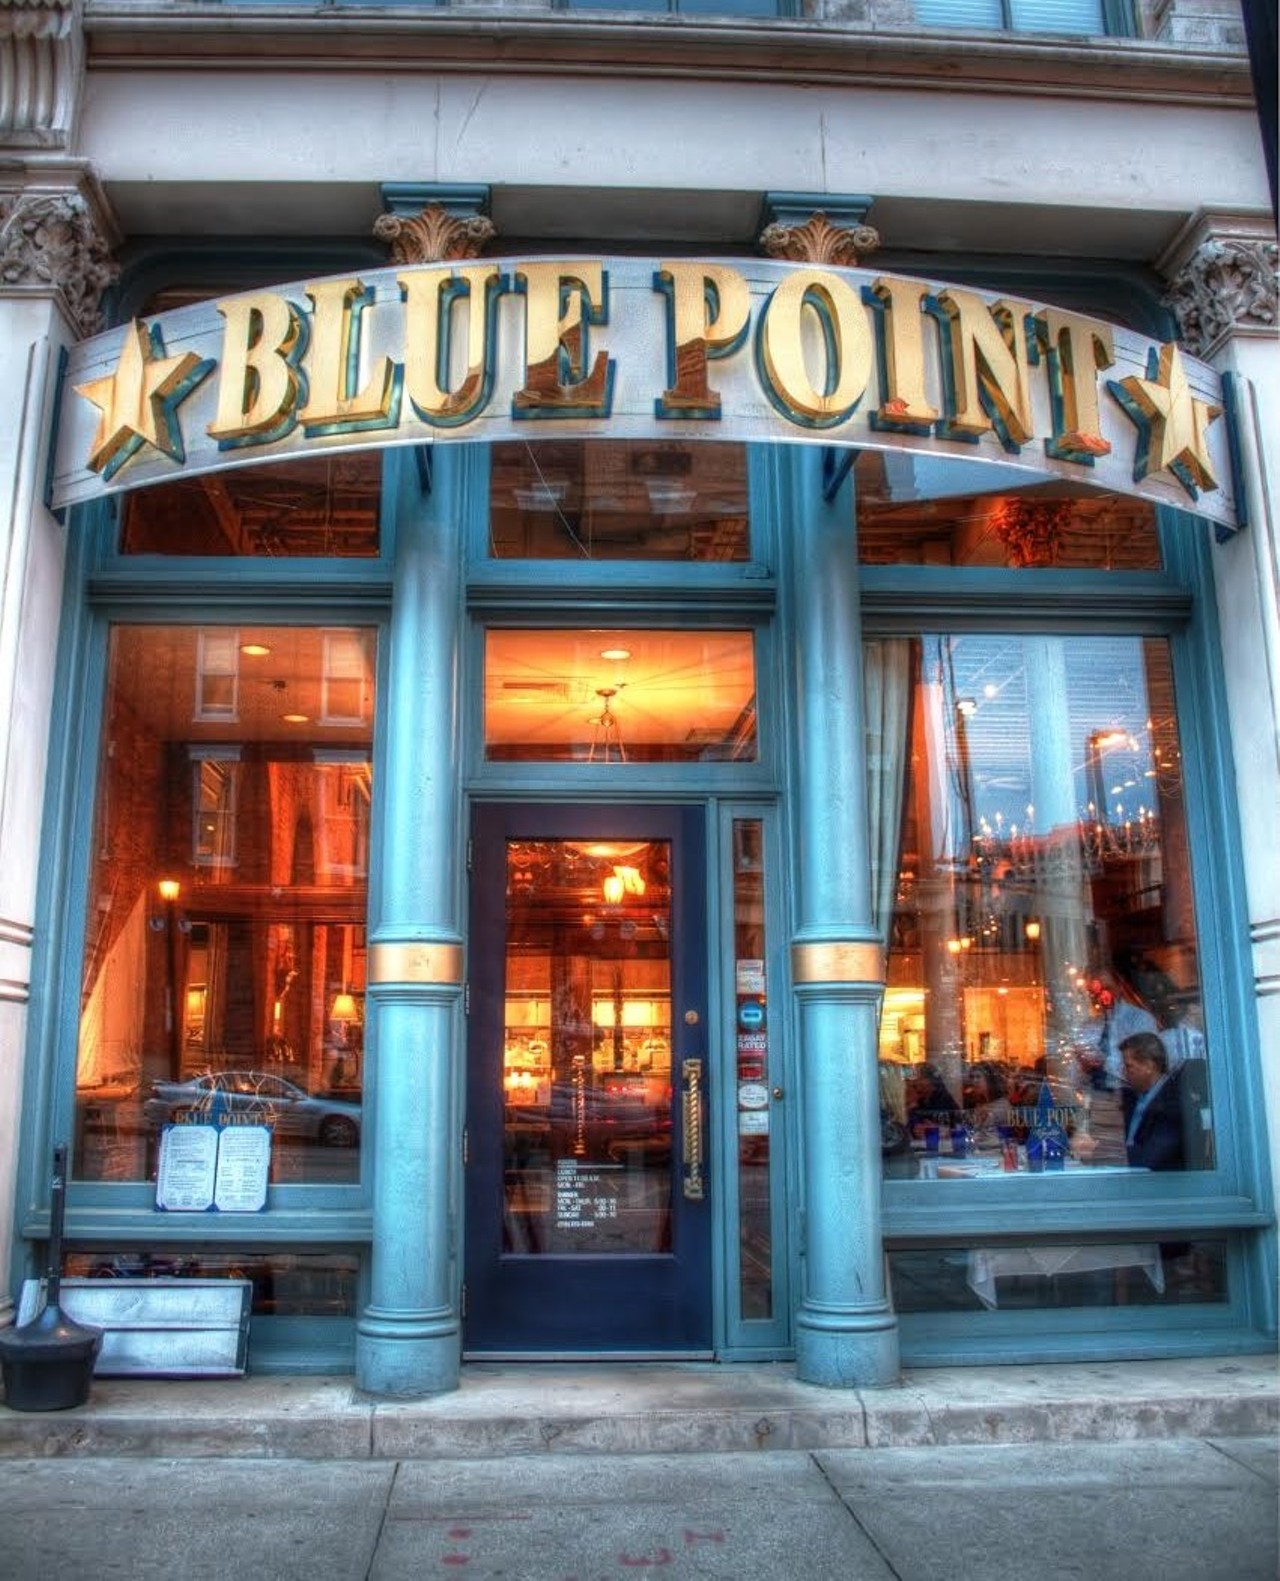  Blue Point Grille
700 West St. Clair Ave., Cleveland
The downtown dining landscape has undergone change after change throughout the years. But through it all, Blue Point has been an institution, one of the restaurants that stays consistent with the times while maintaining a high standard of consistency and tradition. 
Photo via Blue Point Grille/Facebook